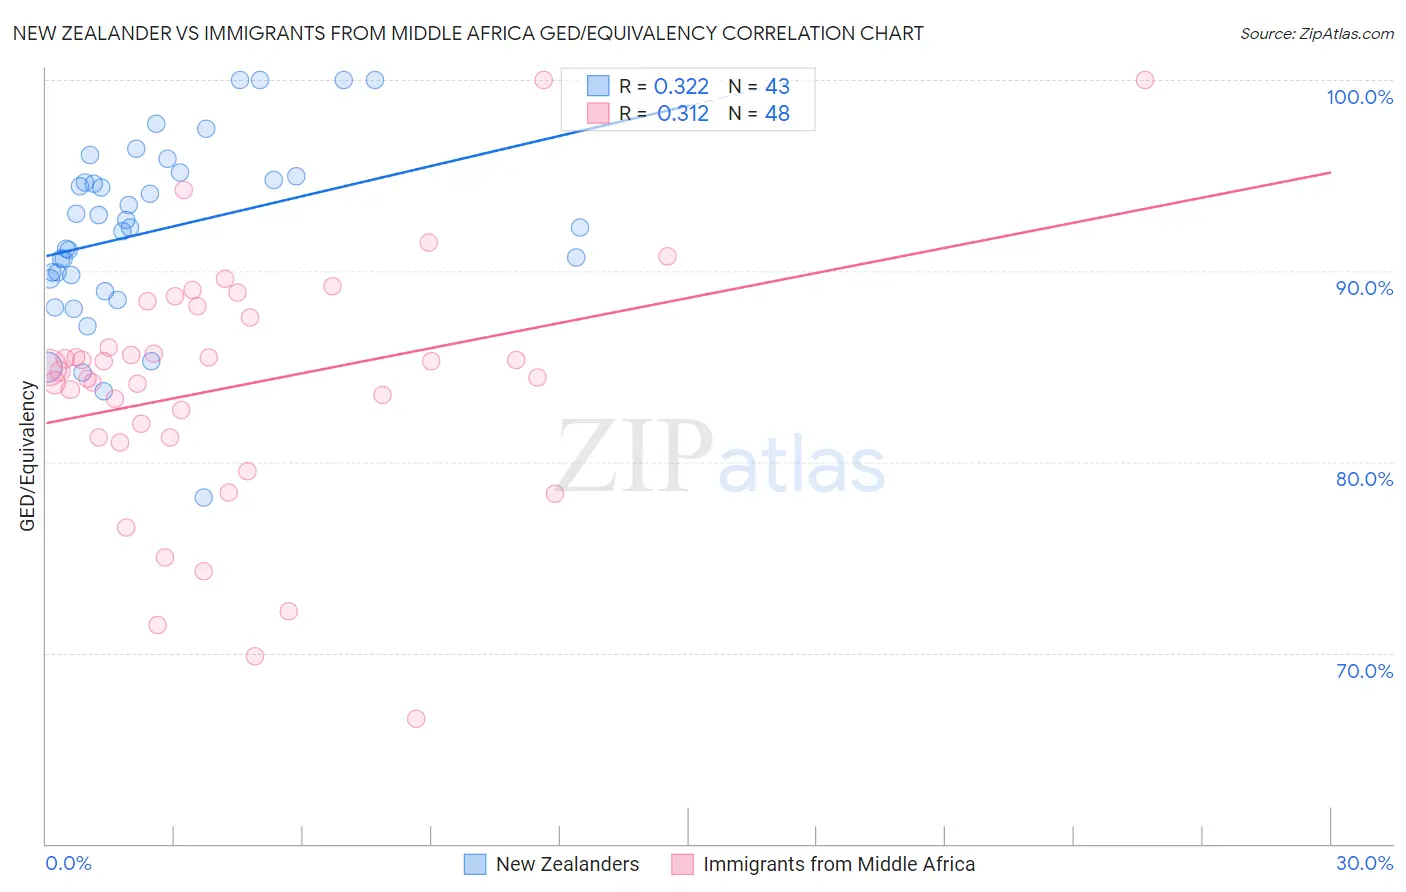 New Zealander vs Immigrants from Middle Africa GED/Equivalency